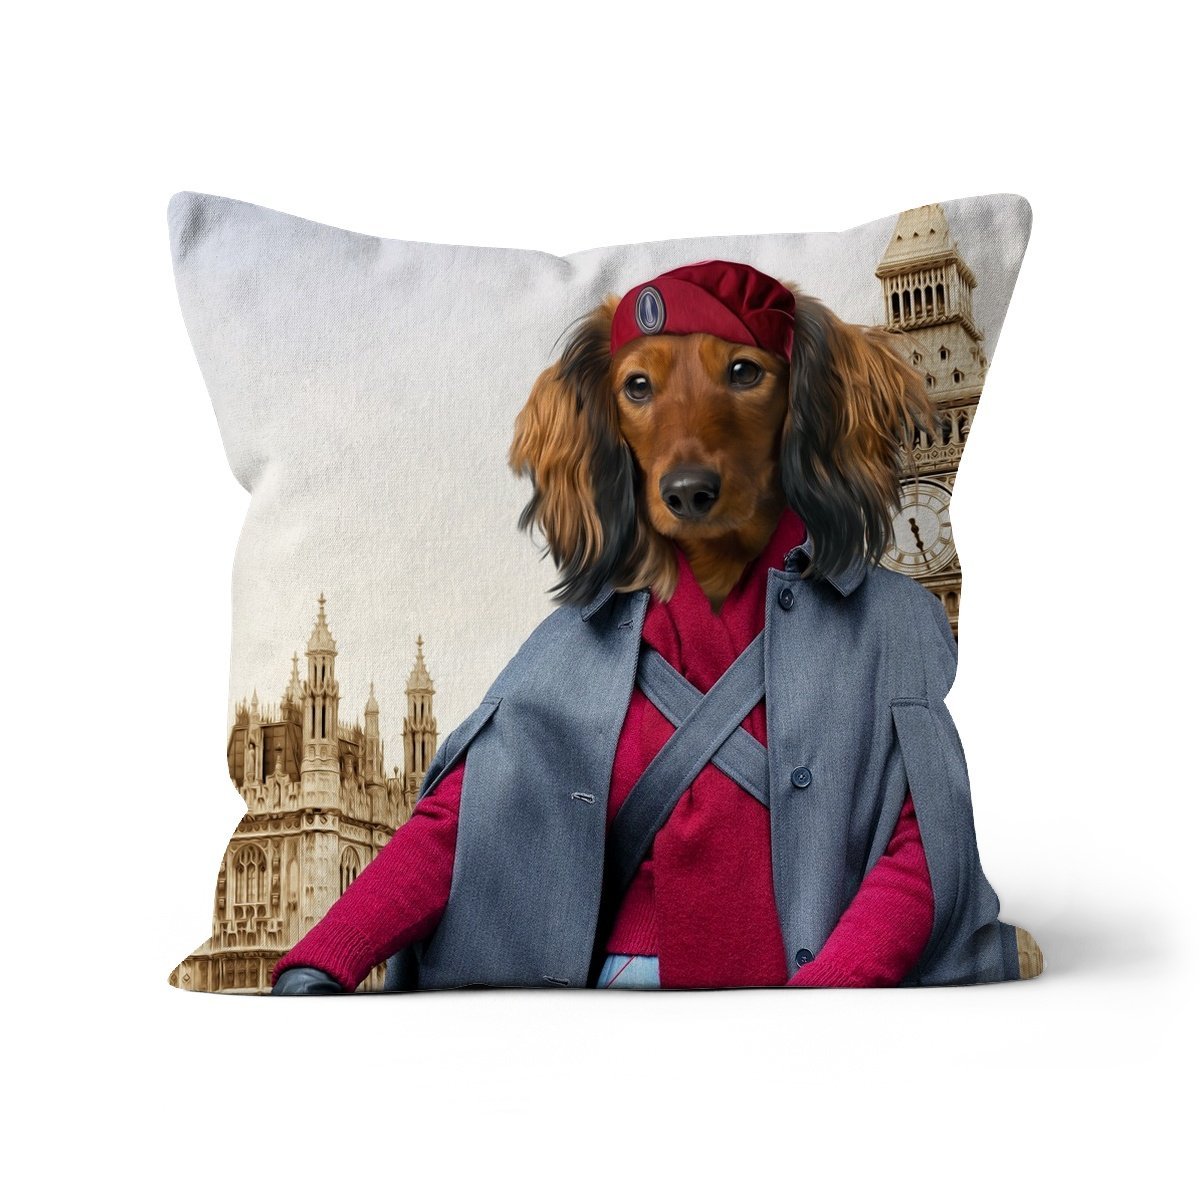 The Midwife (Call The Midwife Inspired): Custom Pet Cushion - Paw & Glory - #pet portraits# - #dog portraits# - #pet portraits uk#pawandglory, pet art pillow,custom pillow of your pet, pet pillow, custom cat pillows, photo pet pillow, dog memory pillow